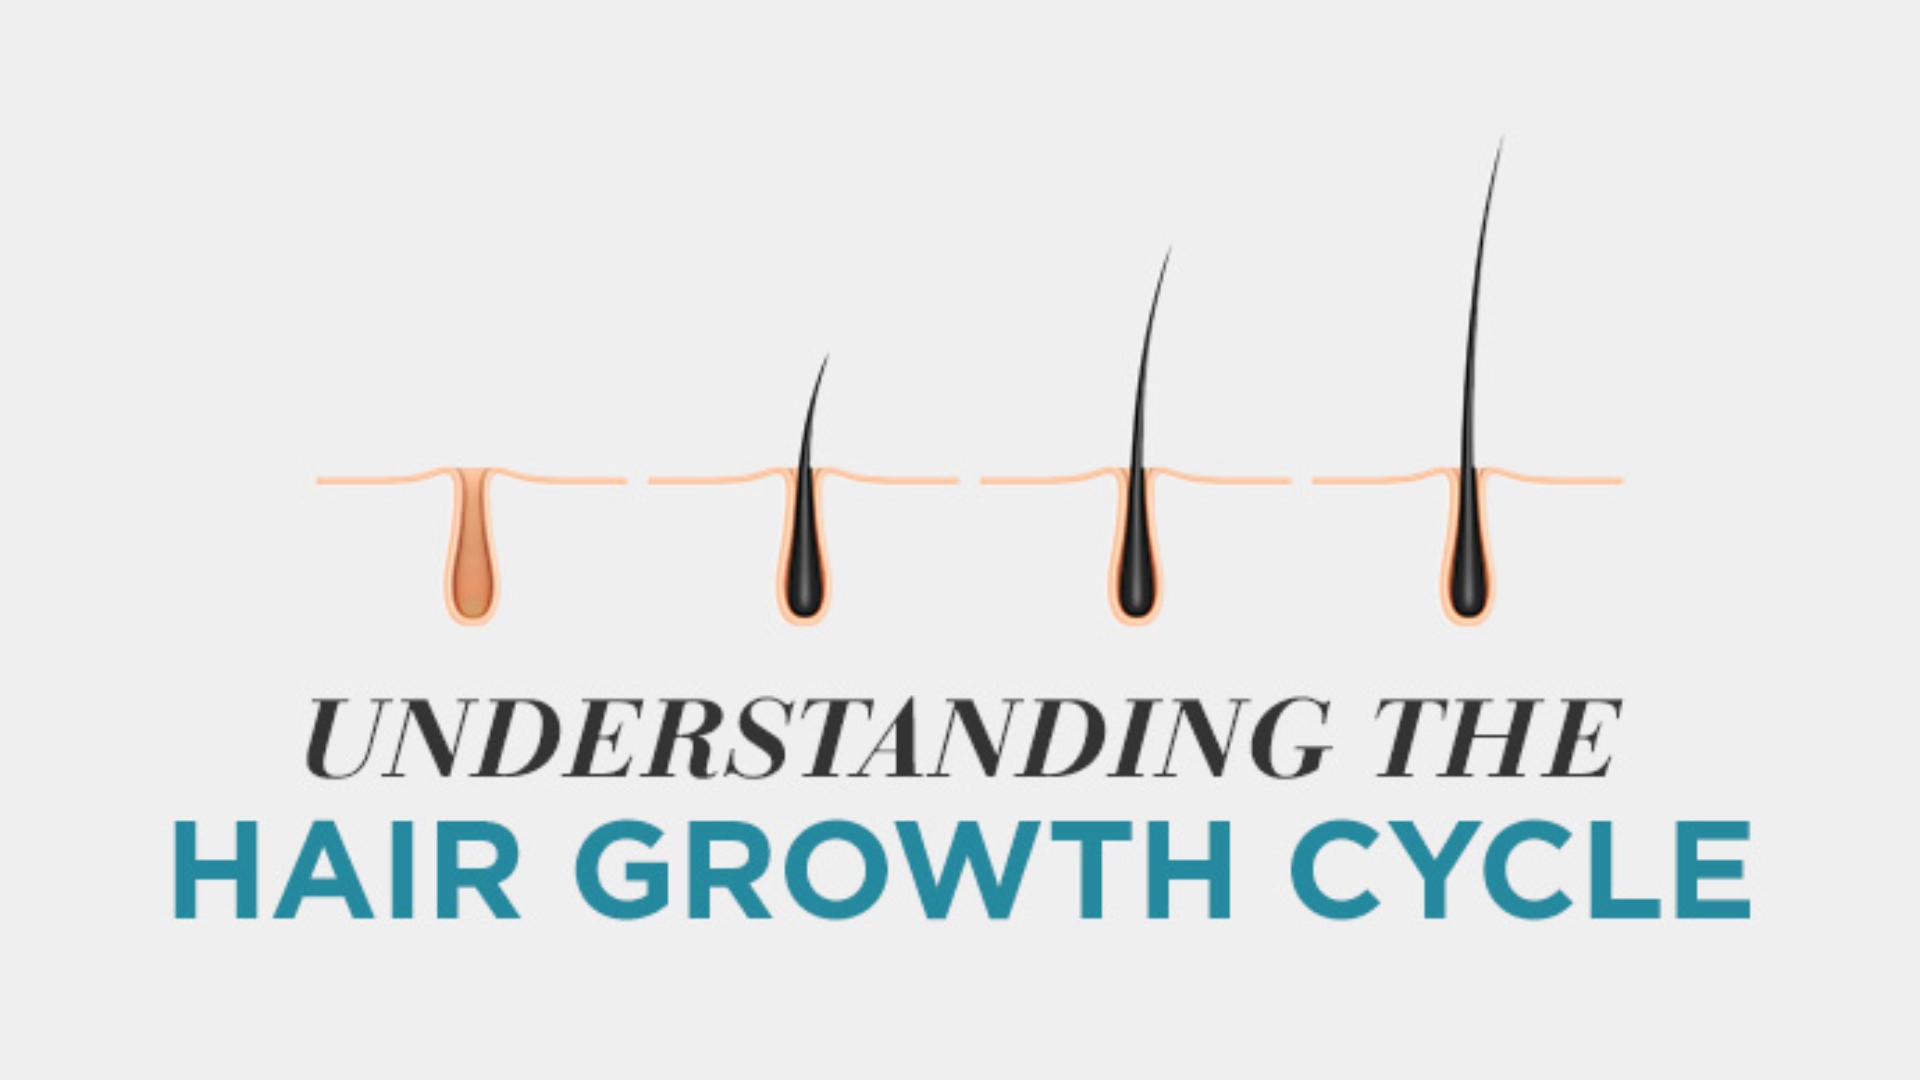 Load video: The Hair Growth Cycle